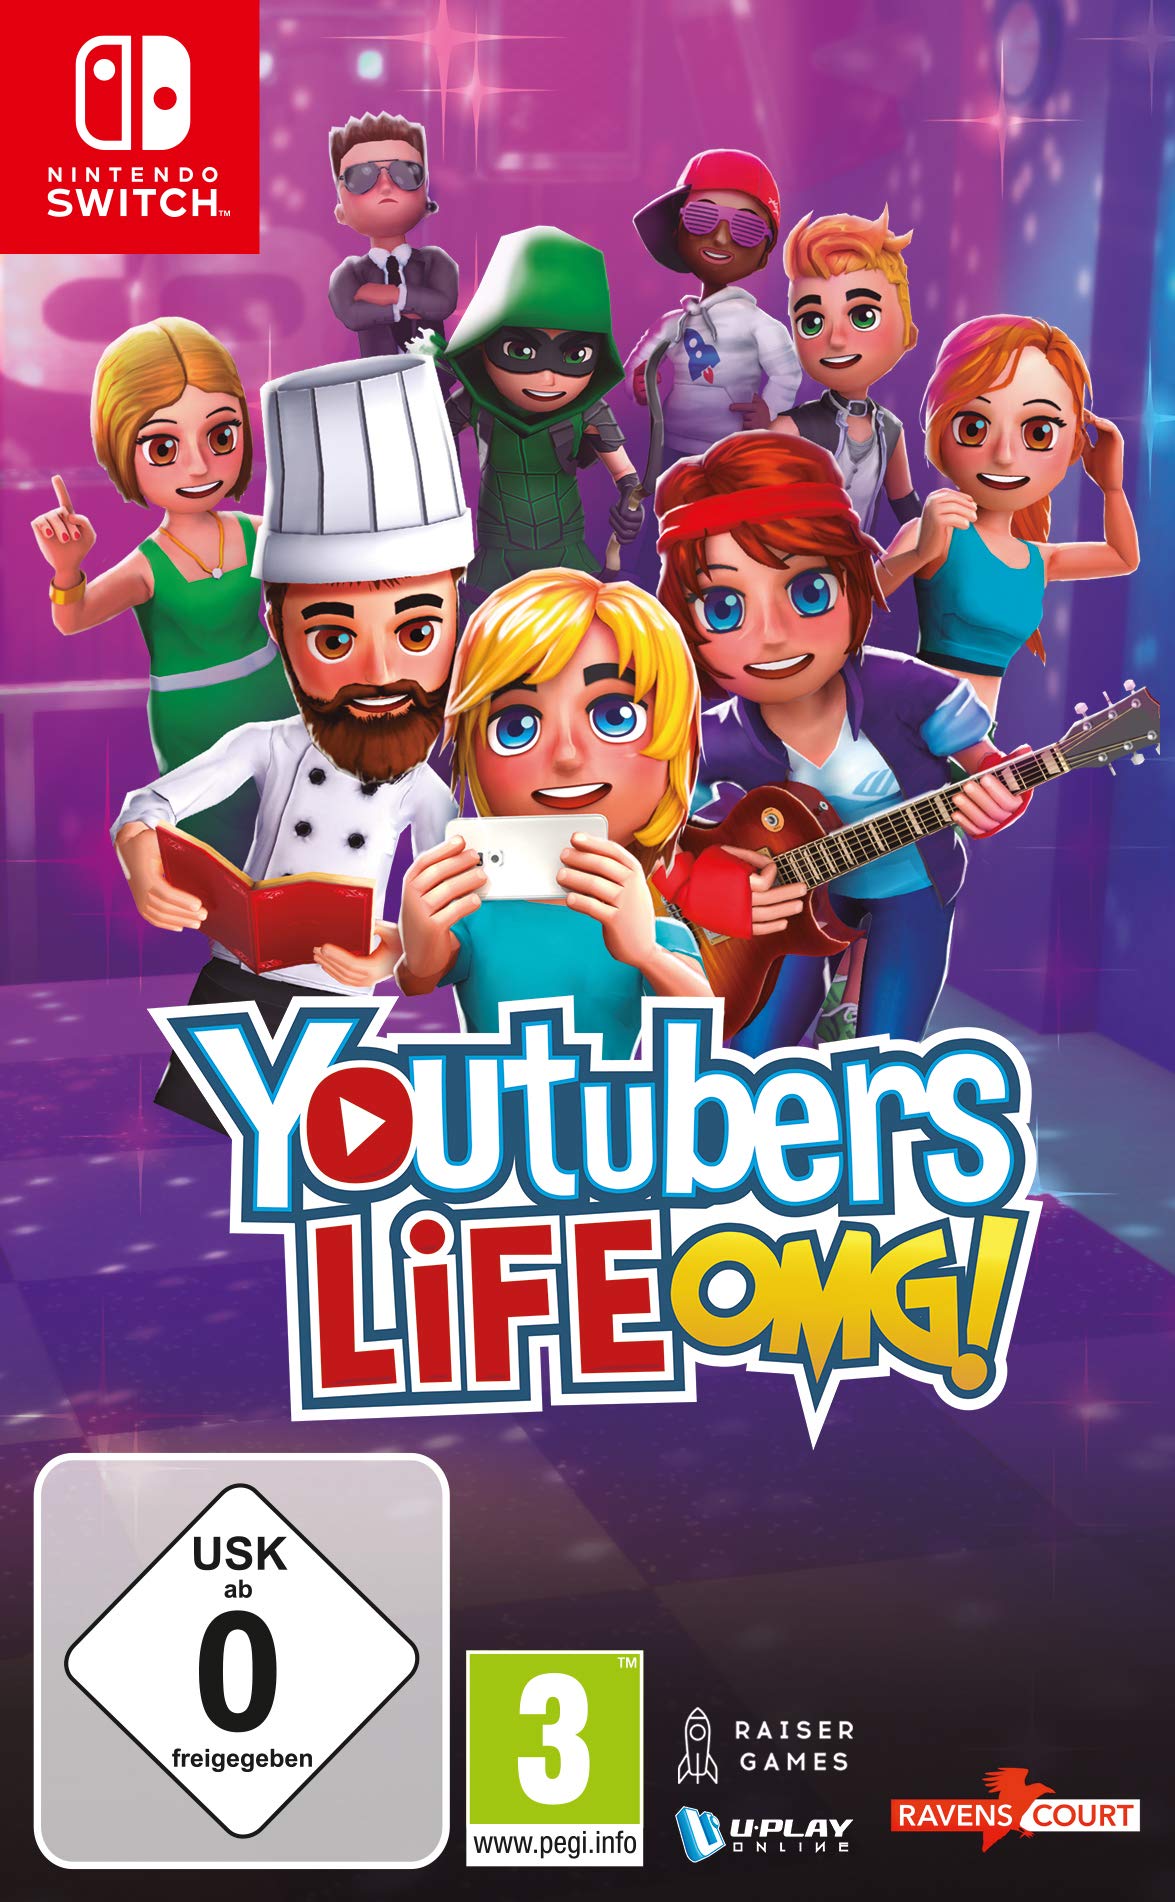 youtubers life free download full version